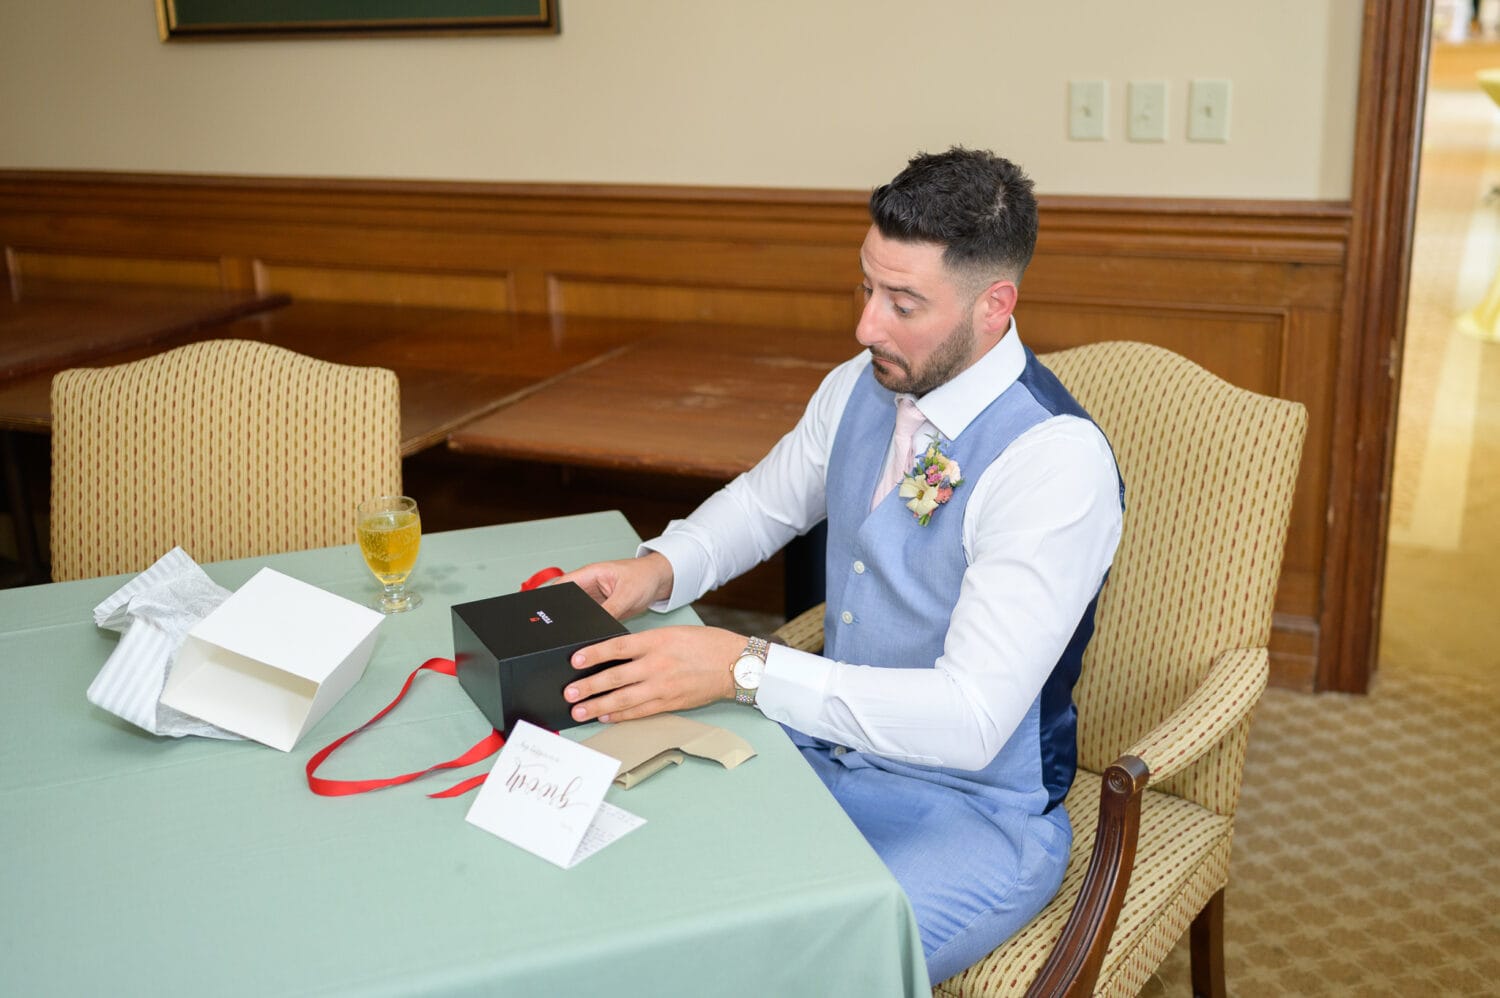 Groom opening his gift from the bride - Pawleys Plantation Golf & Country Club